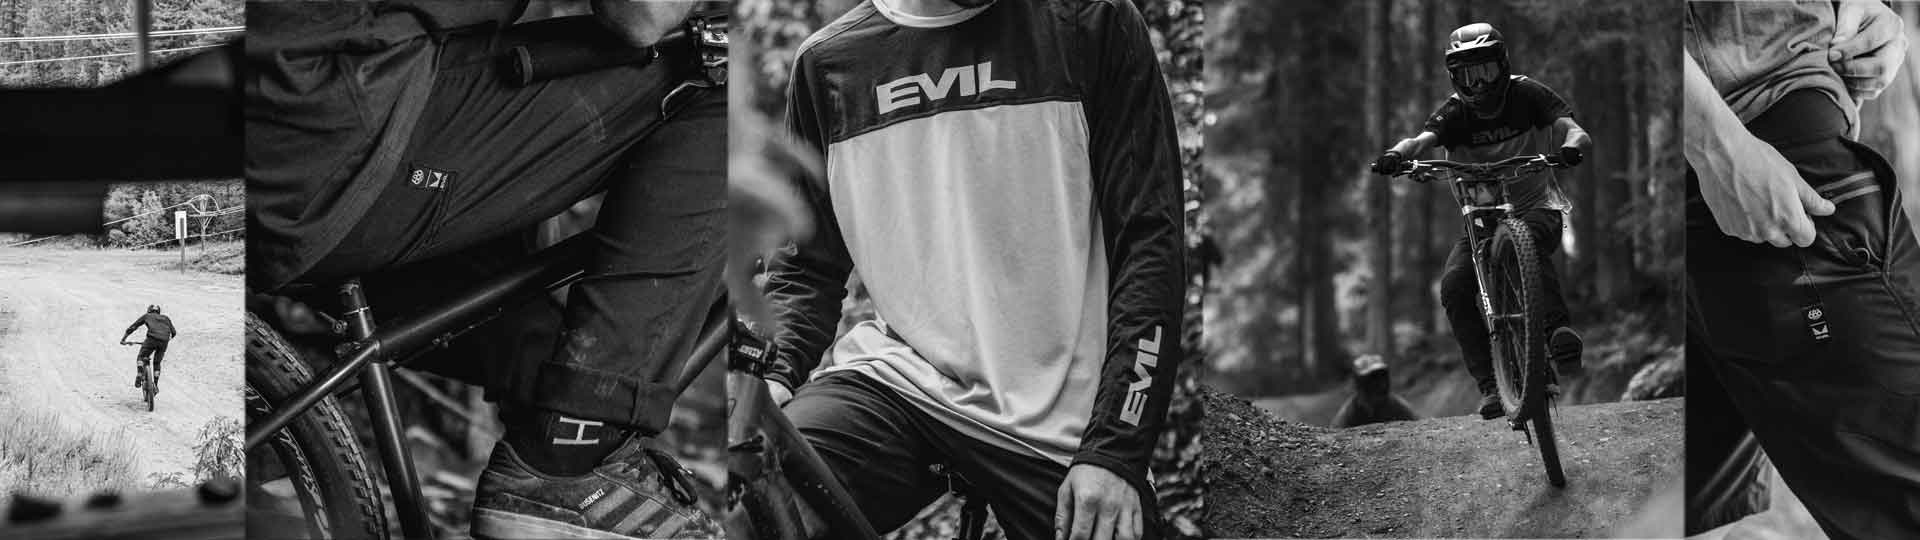 Rider Owned, Designed and Operated – Evil Bikes Global, S.L.